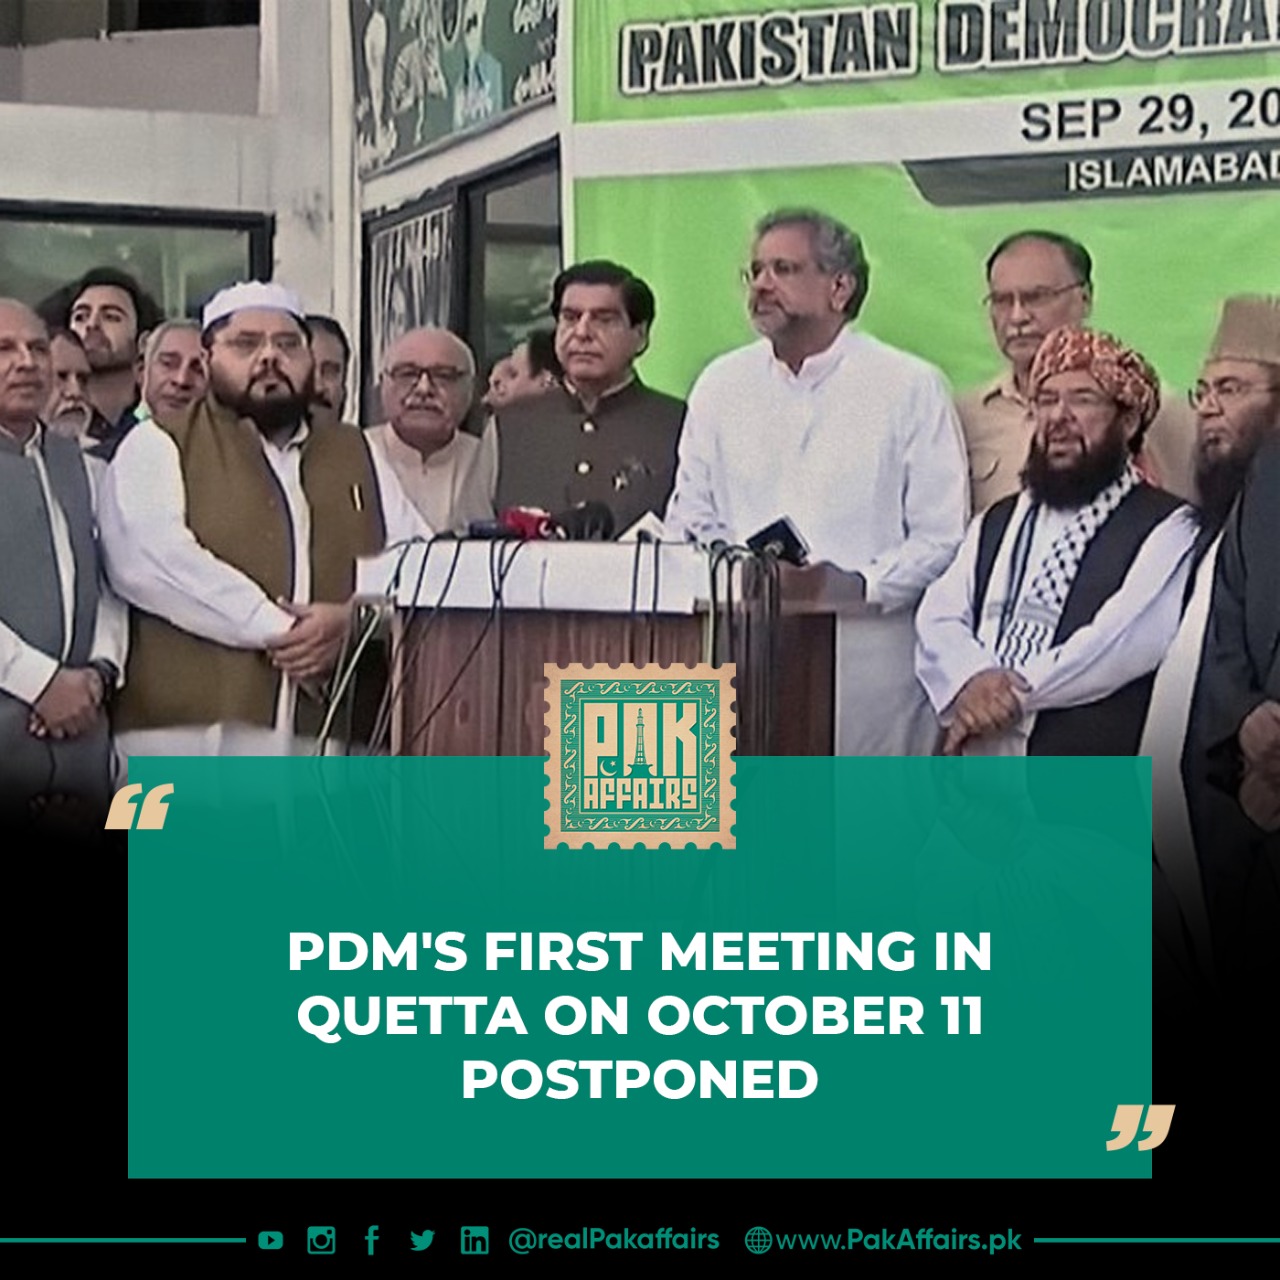 PDM's first meeting in Quetta on October 11 postponed.